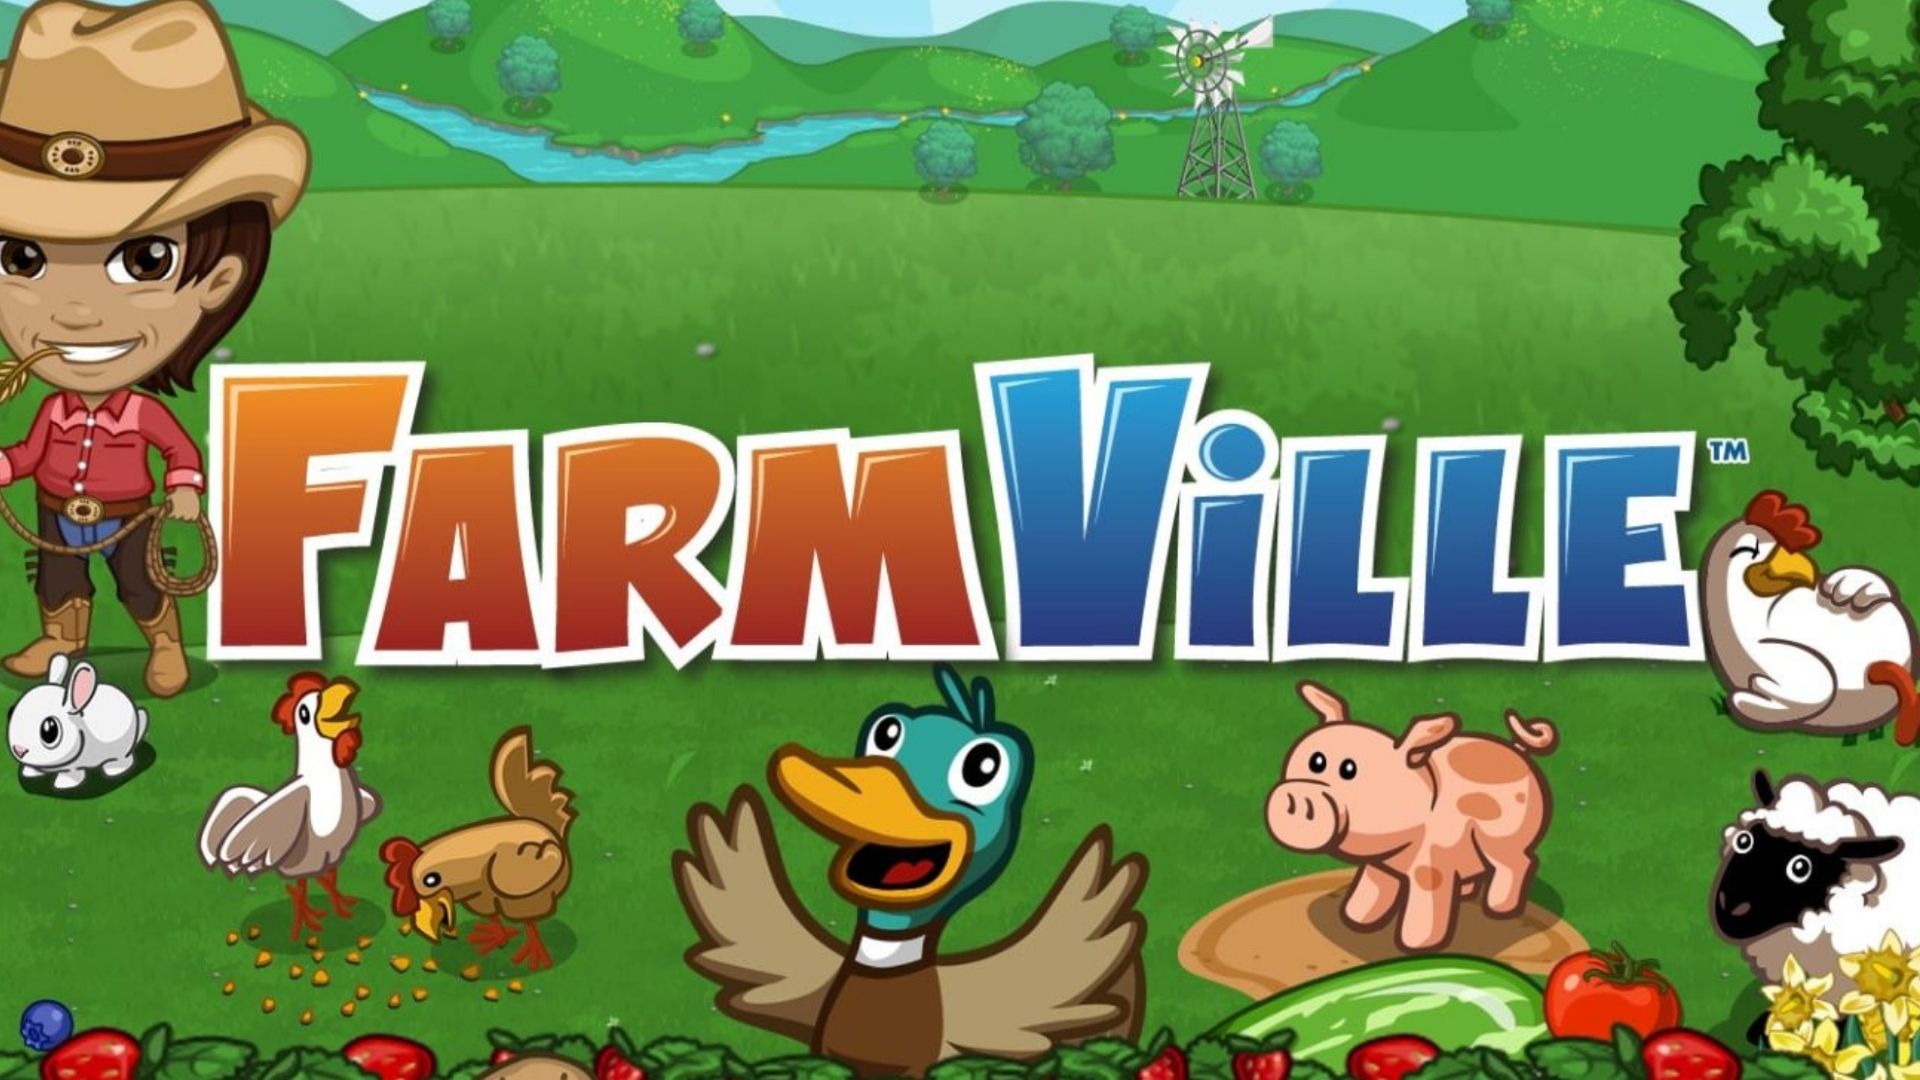 'FarmVille' Changed Online Gaming Forever, Now It's Going Offline